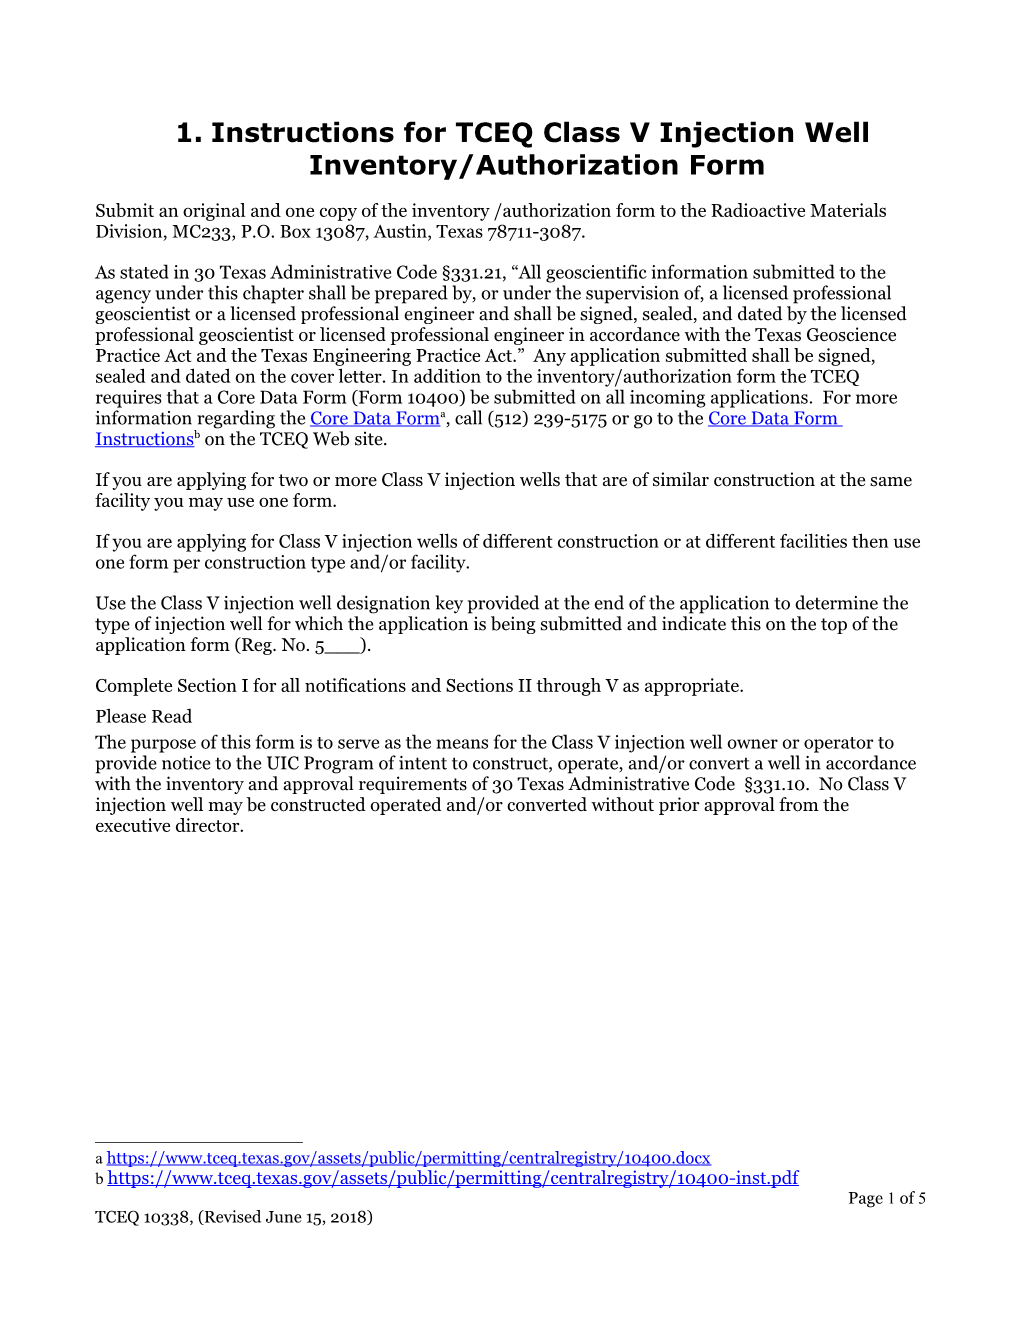 Instructions for TCEQ Class V Injection Well Inventory/Authorization Form